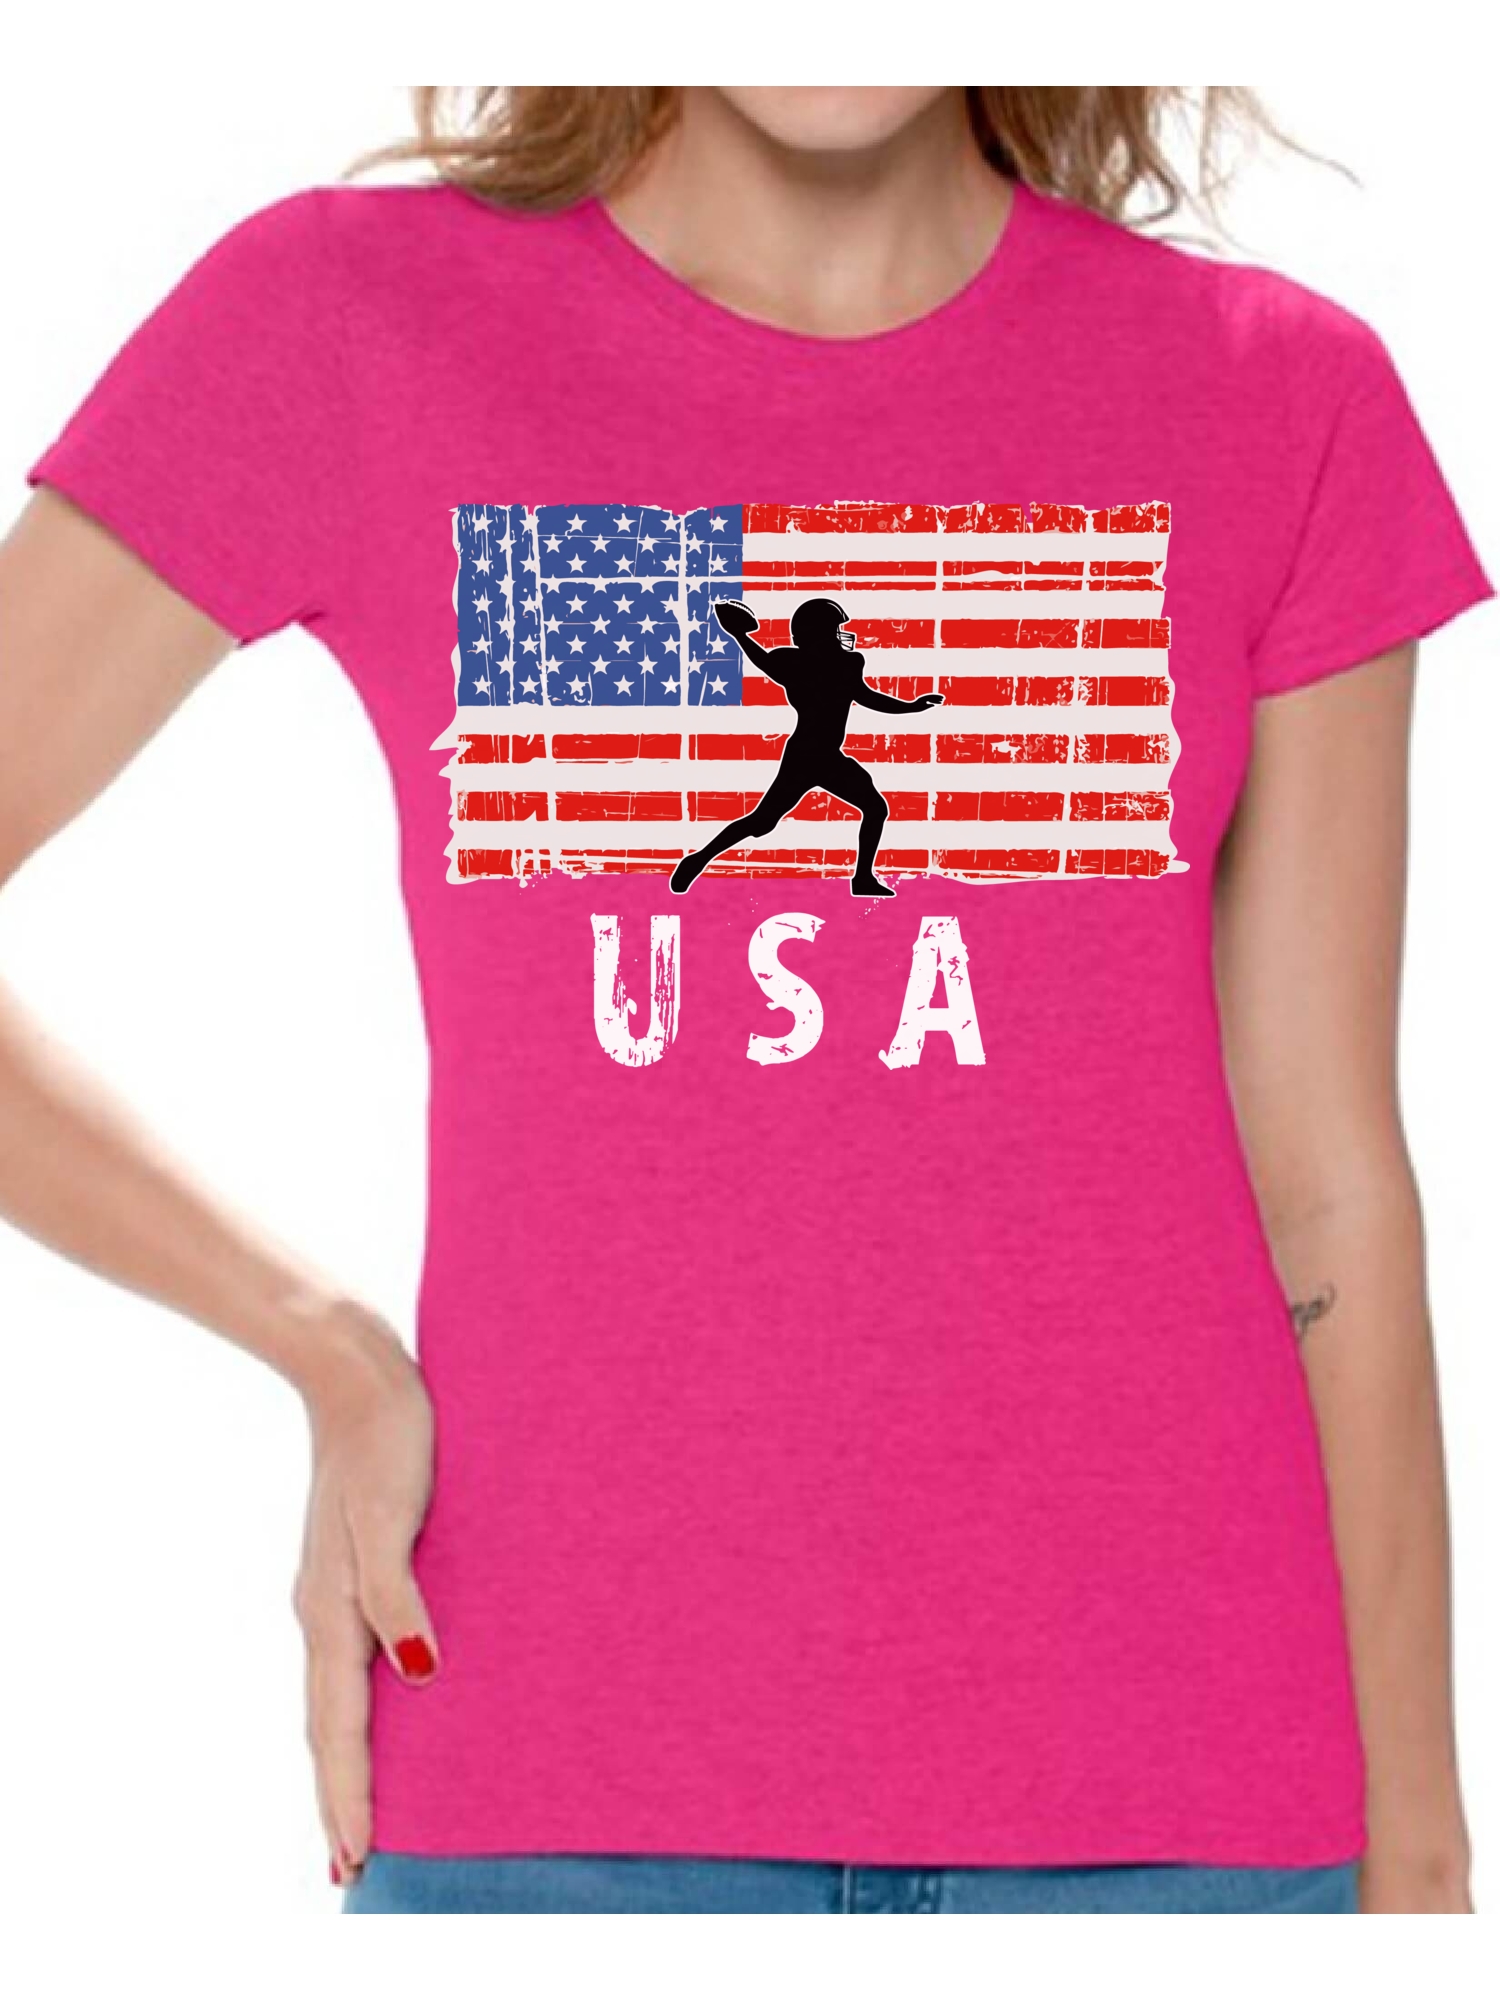 Awkward Styles American Football USA Women Shirt Women Gifts 4th of July T shirt for Women Patriotic Gifts Vintage USA Flag Women Tshirt 4th of July Party USA T-shirt for Women Love USA - image 1 of 4